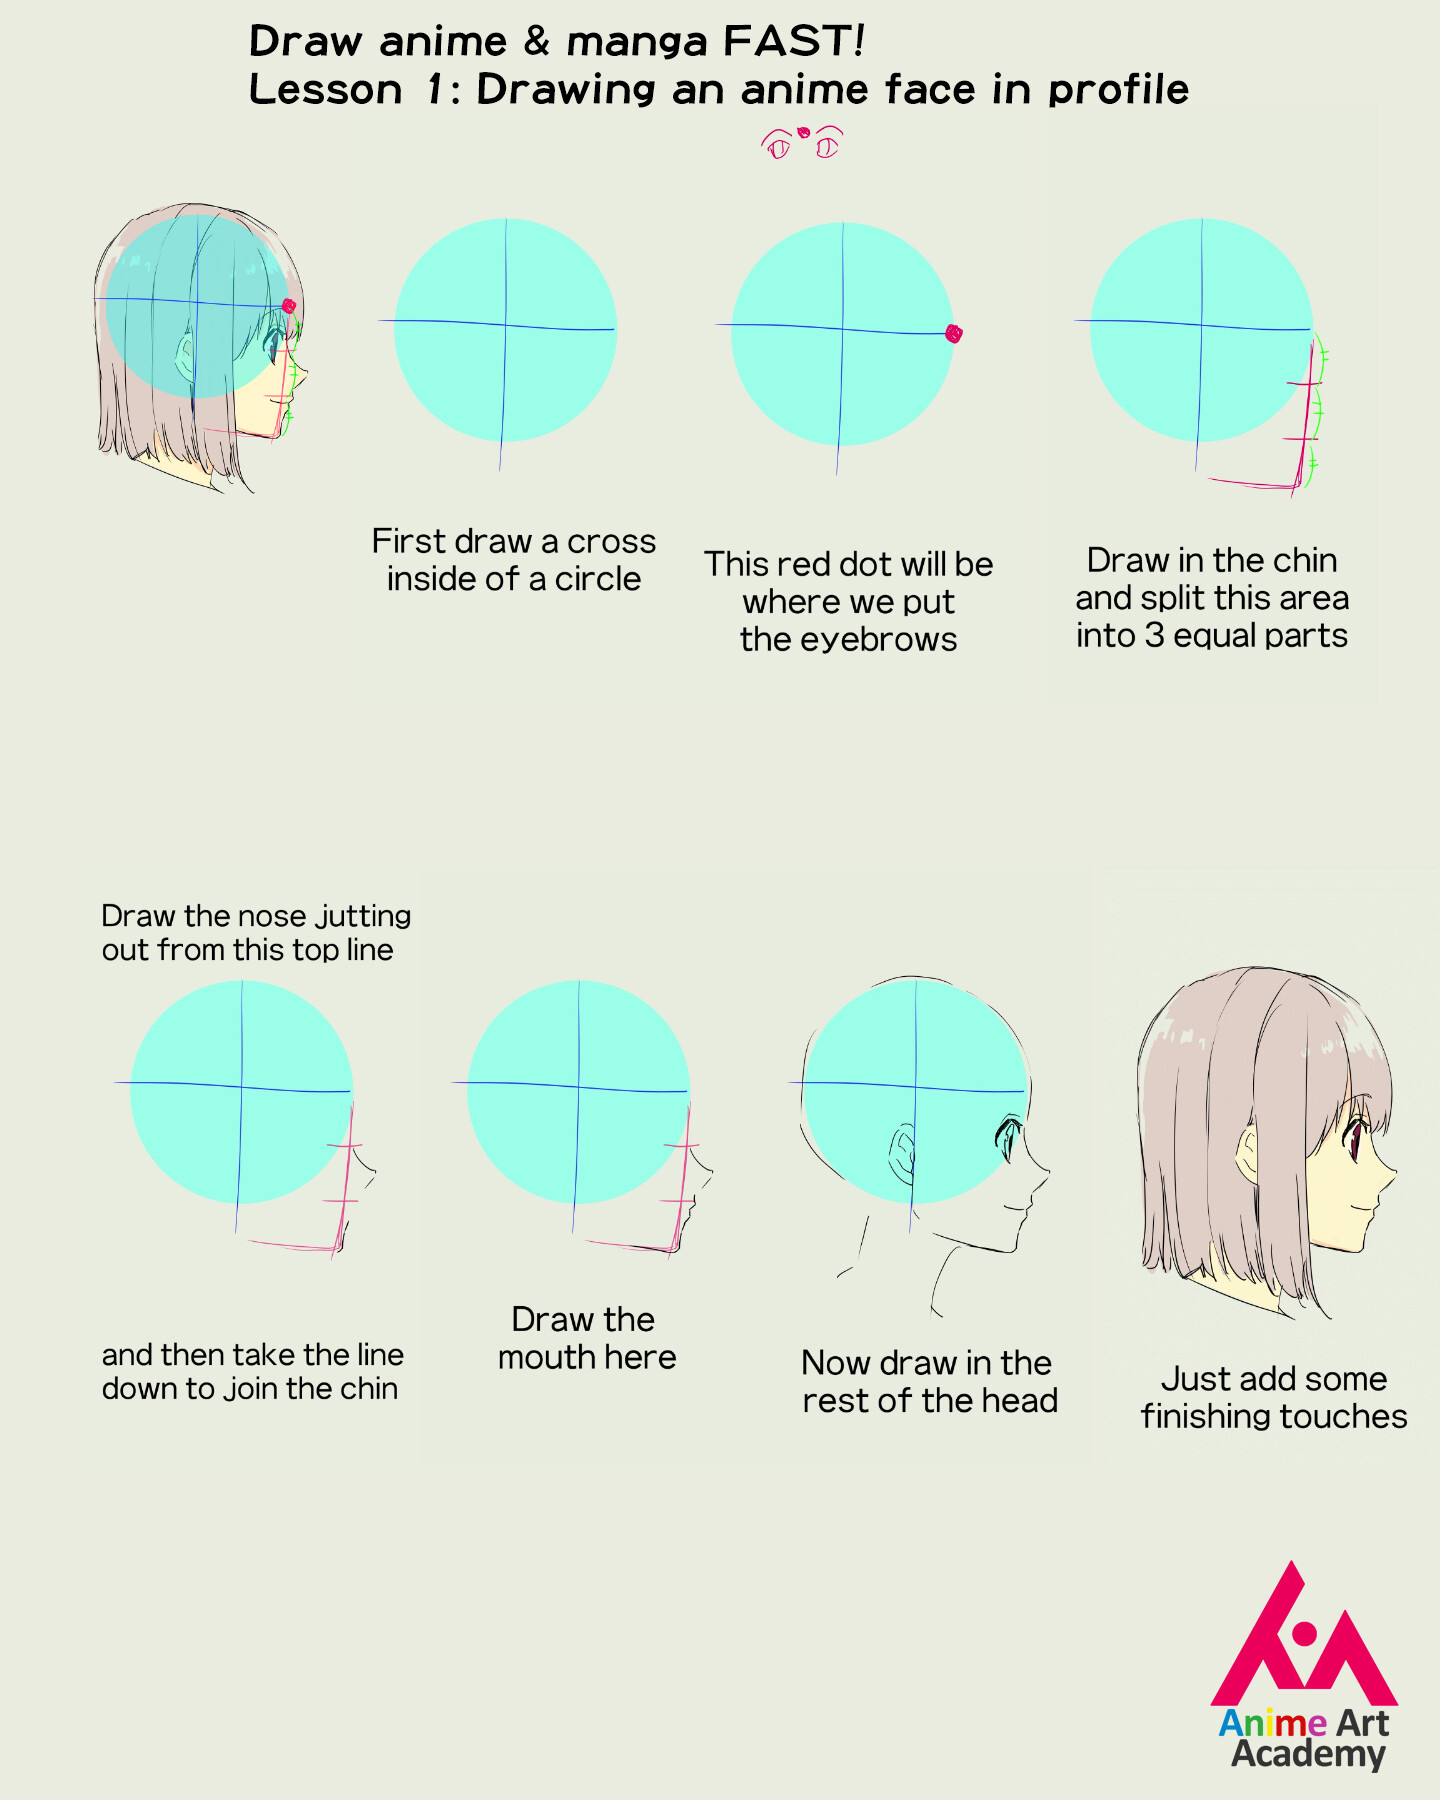 ArtStation - ☆ Manga in a Minute ☆ Draw anime & manga FAST! Lesson 1:  Drawing an anime face in profile